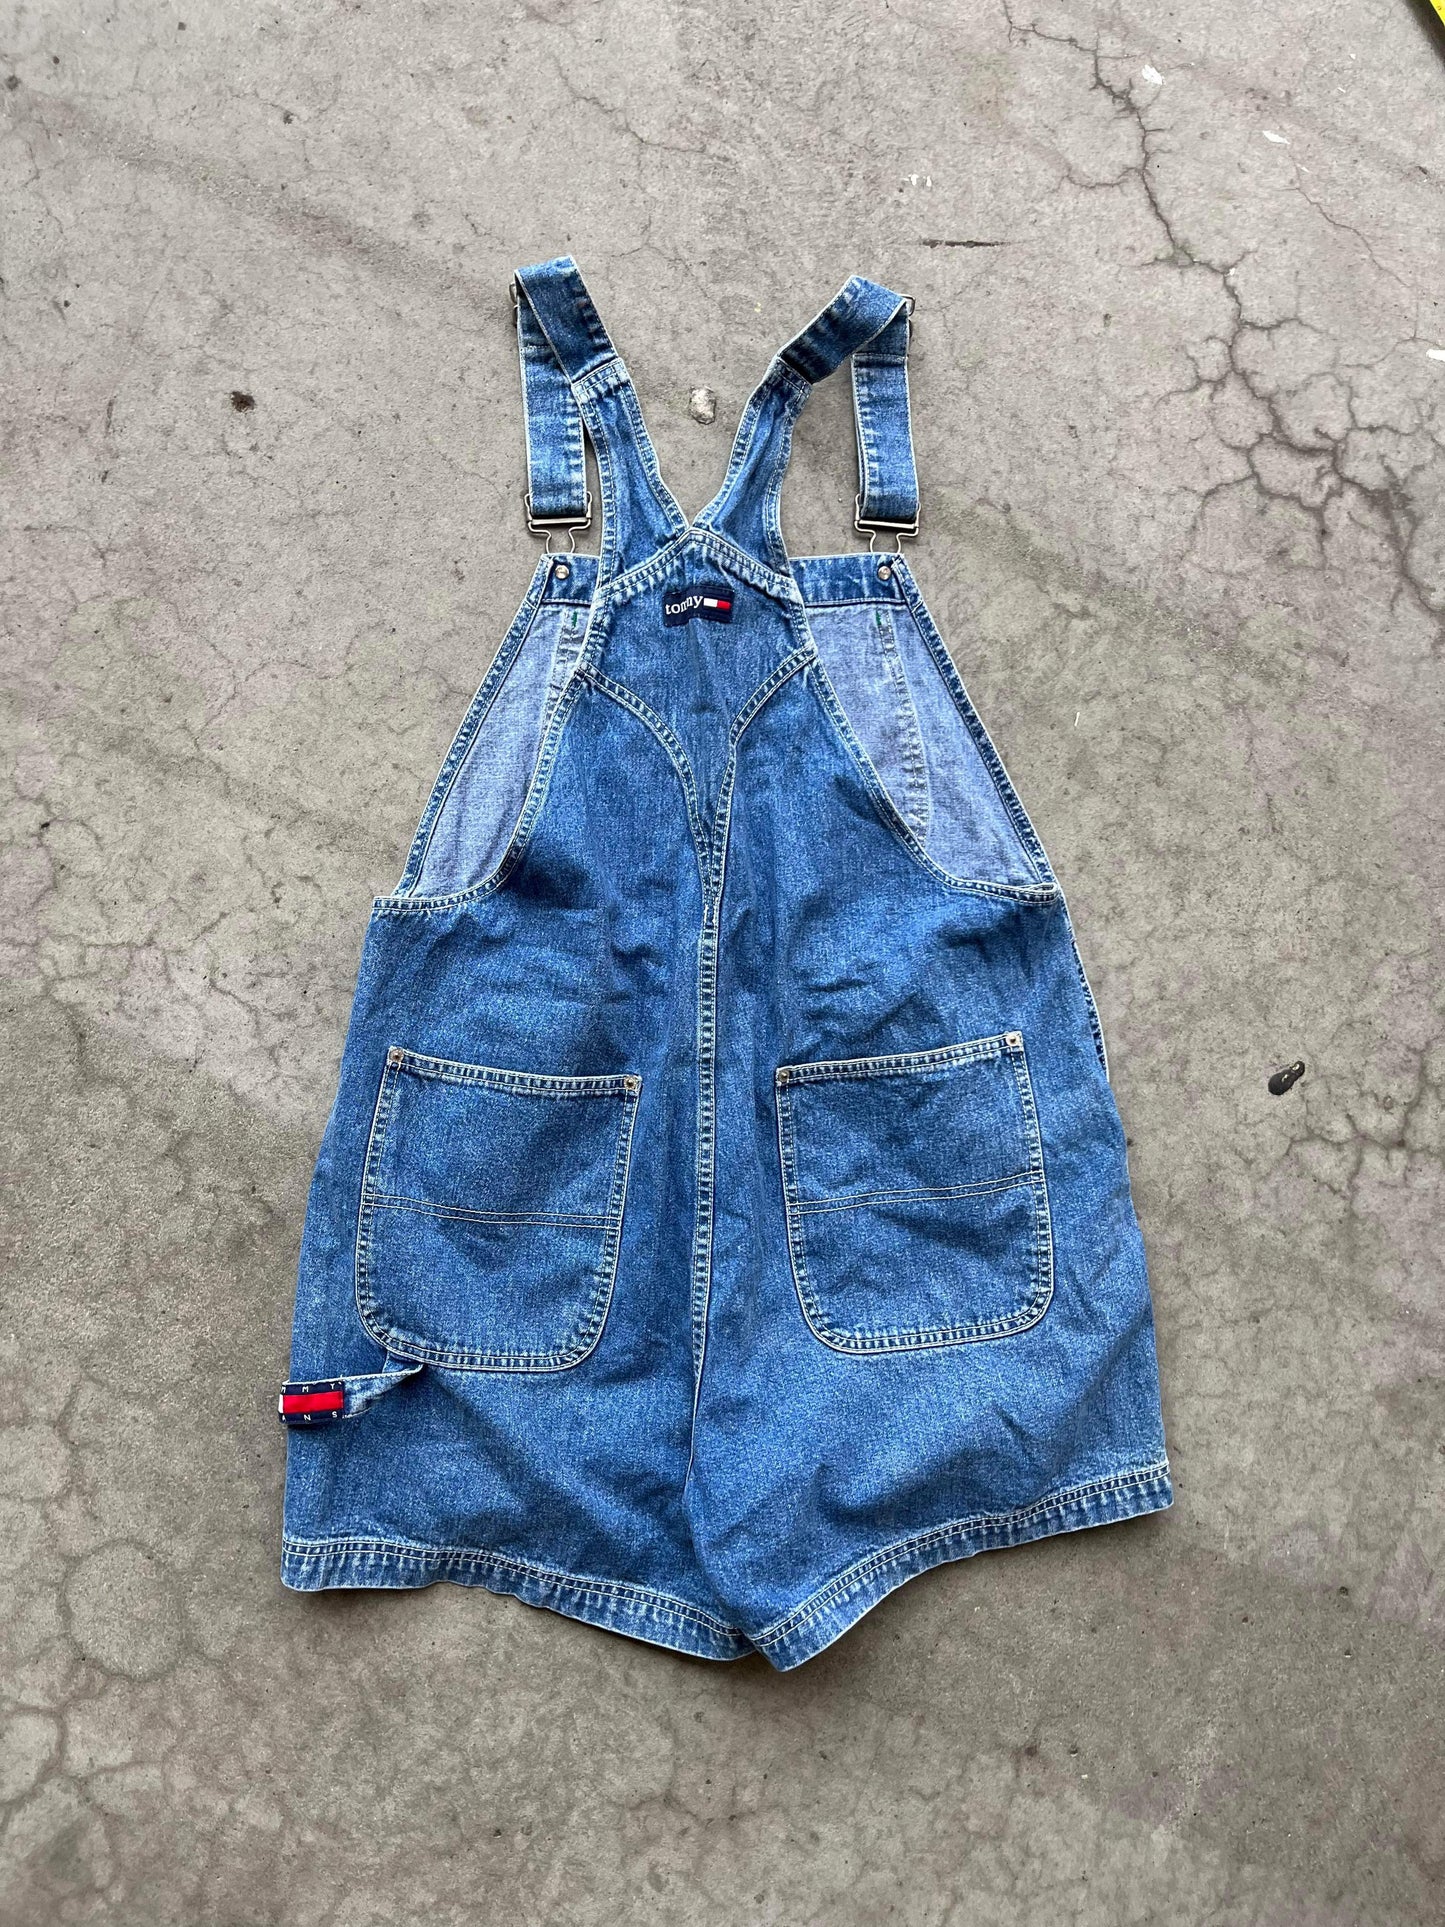 (XL) Tommy Hilfiger Overall Shorts